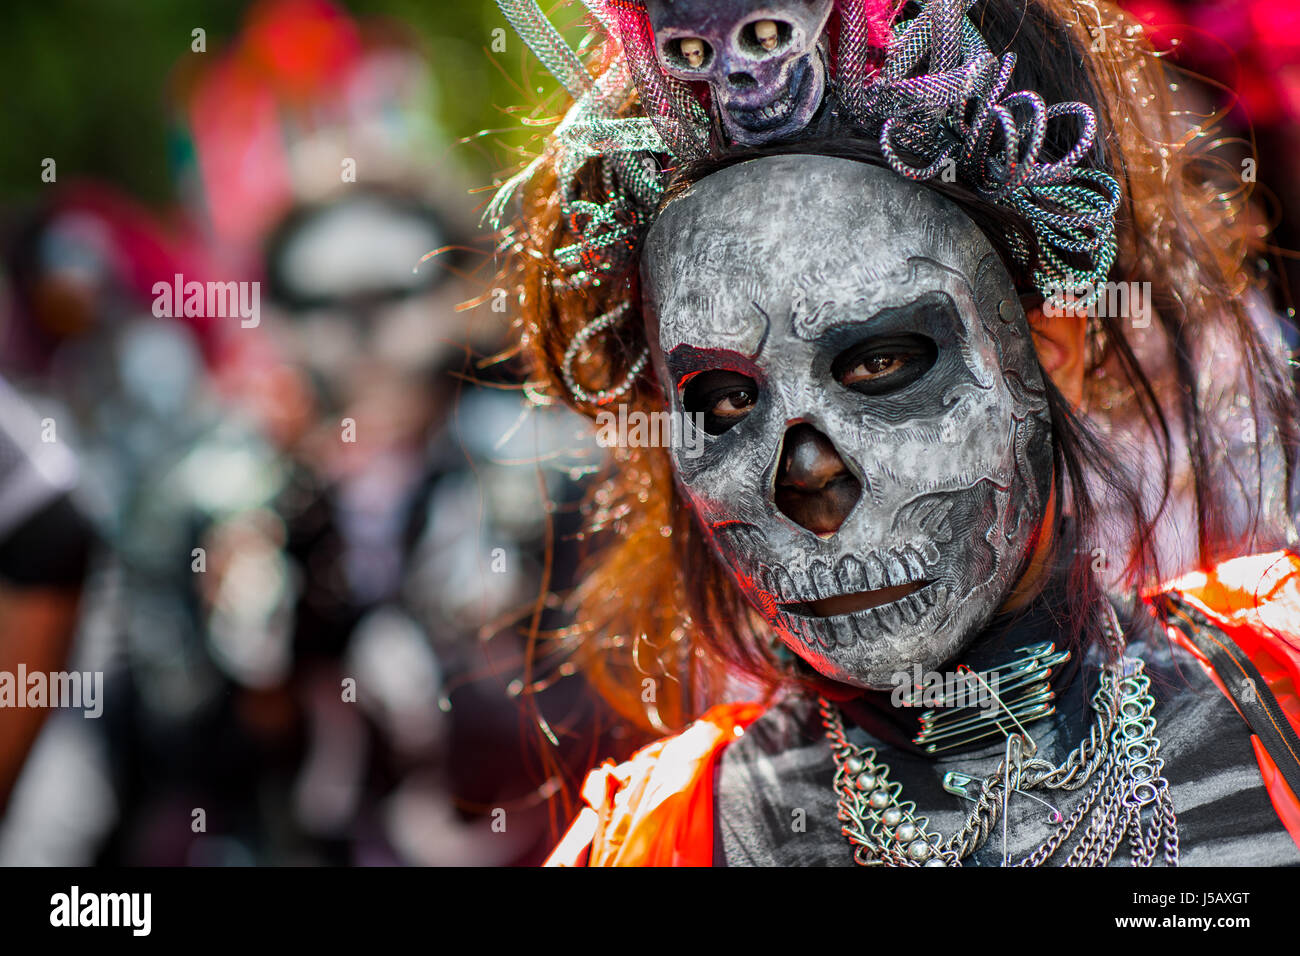 A young woman, dressed as La Catrina, takes part in the Day of the Dead festival in Mexico City, Mexico. Stock Photo